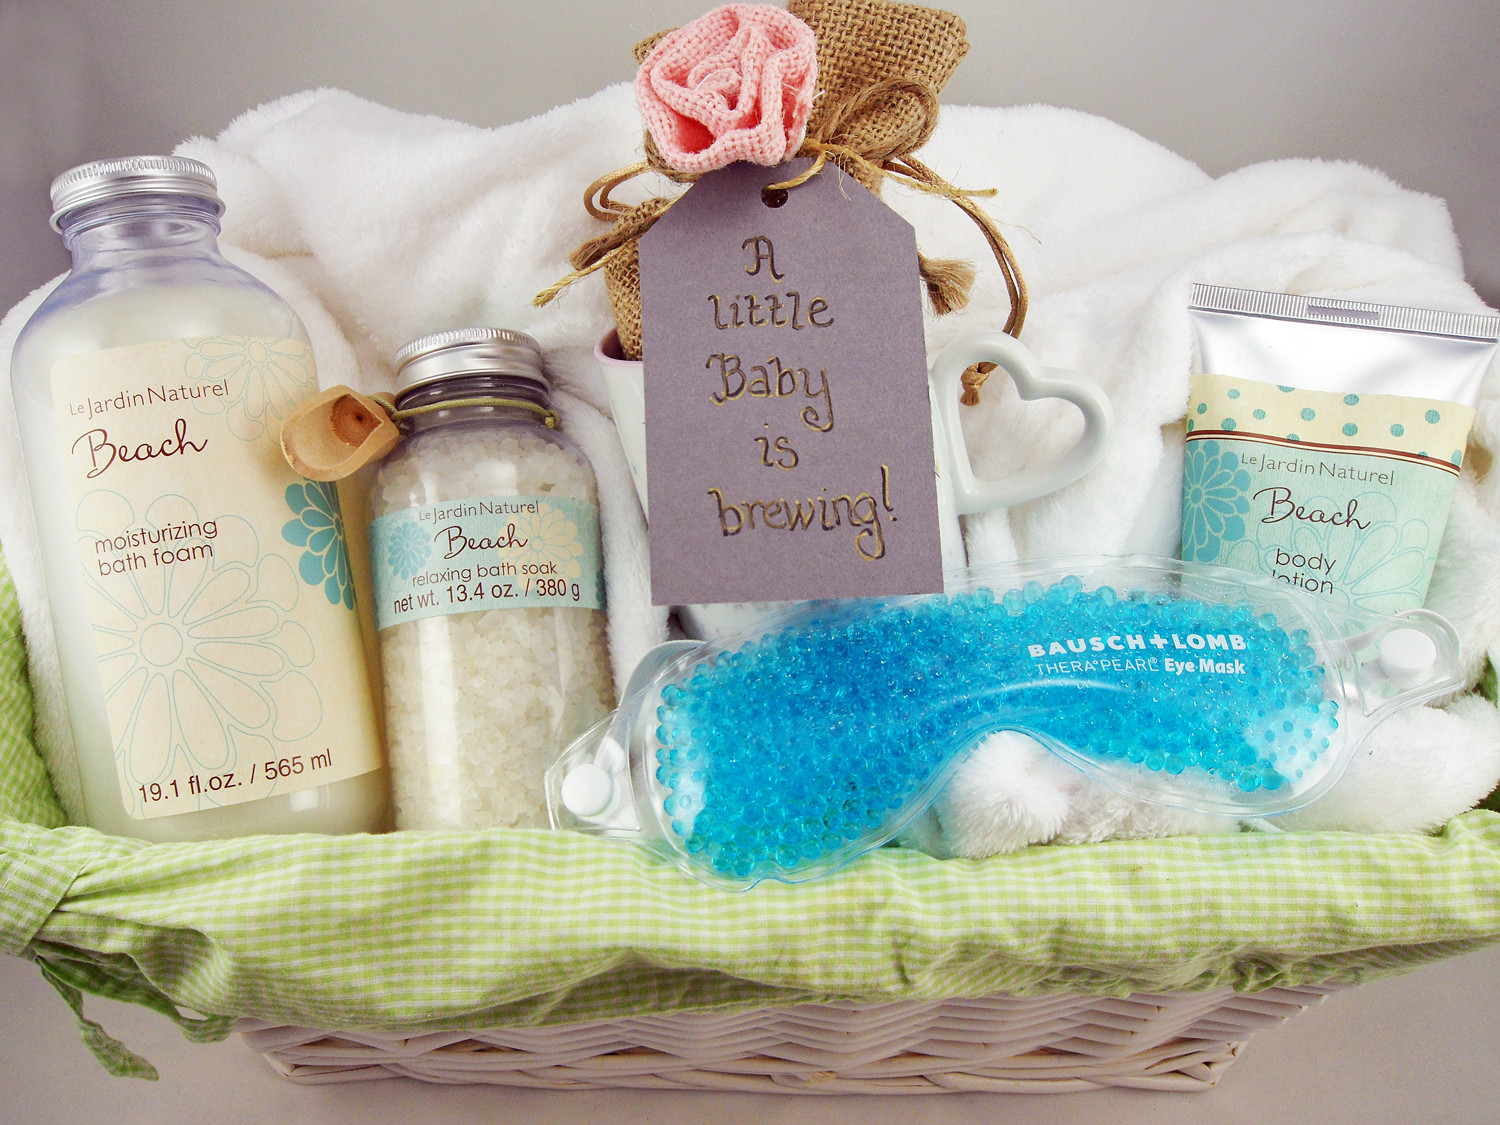 New Baby Gift Ideas For Parents
 Expecting Couples Love These Unique Personalized Baby Gifts